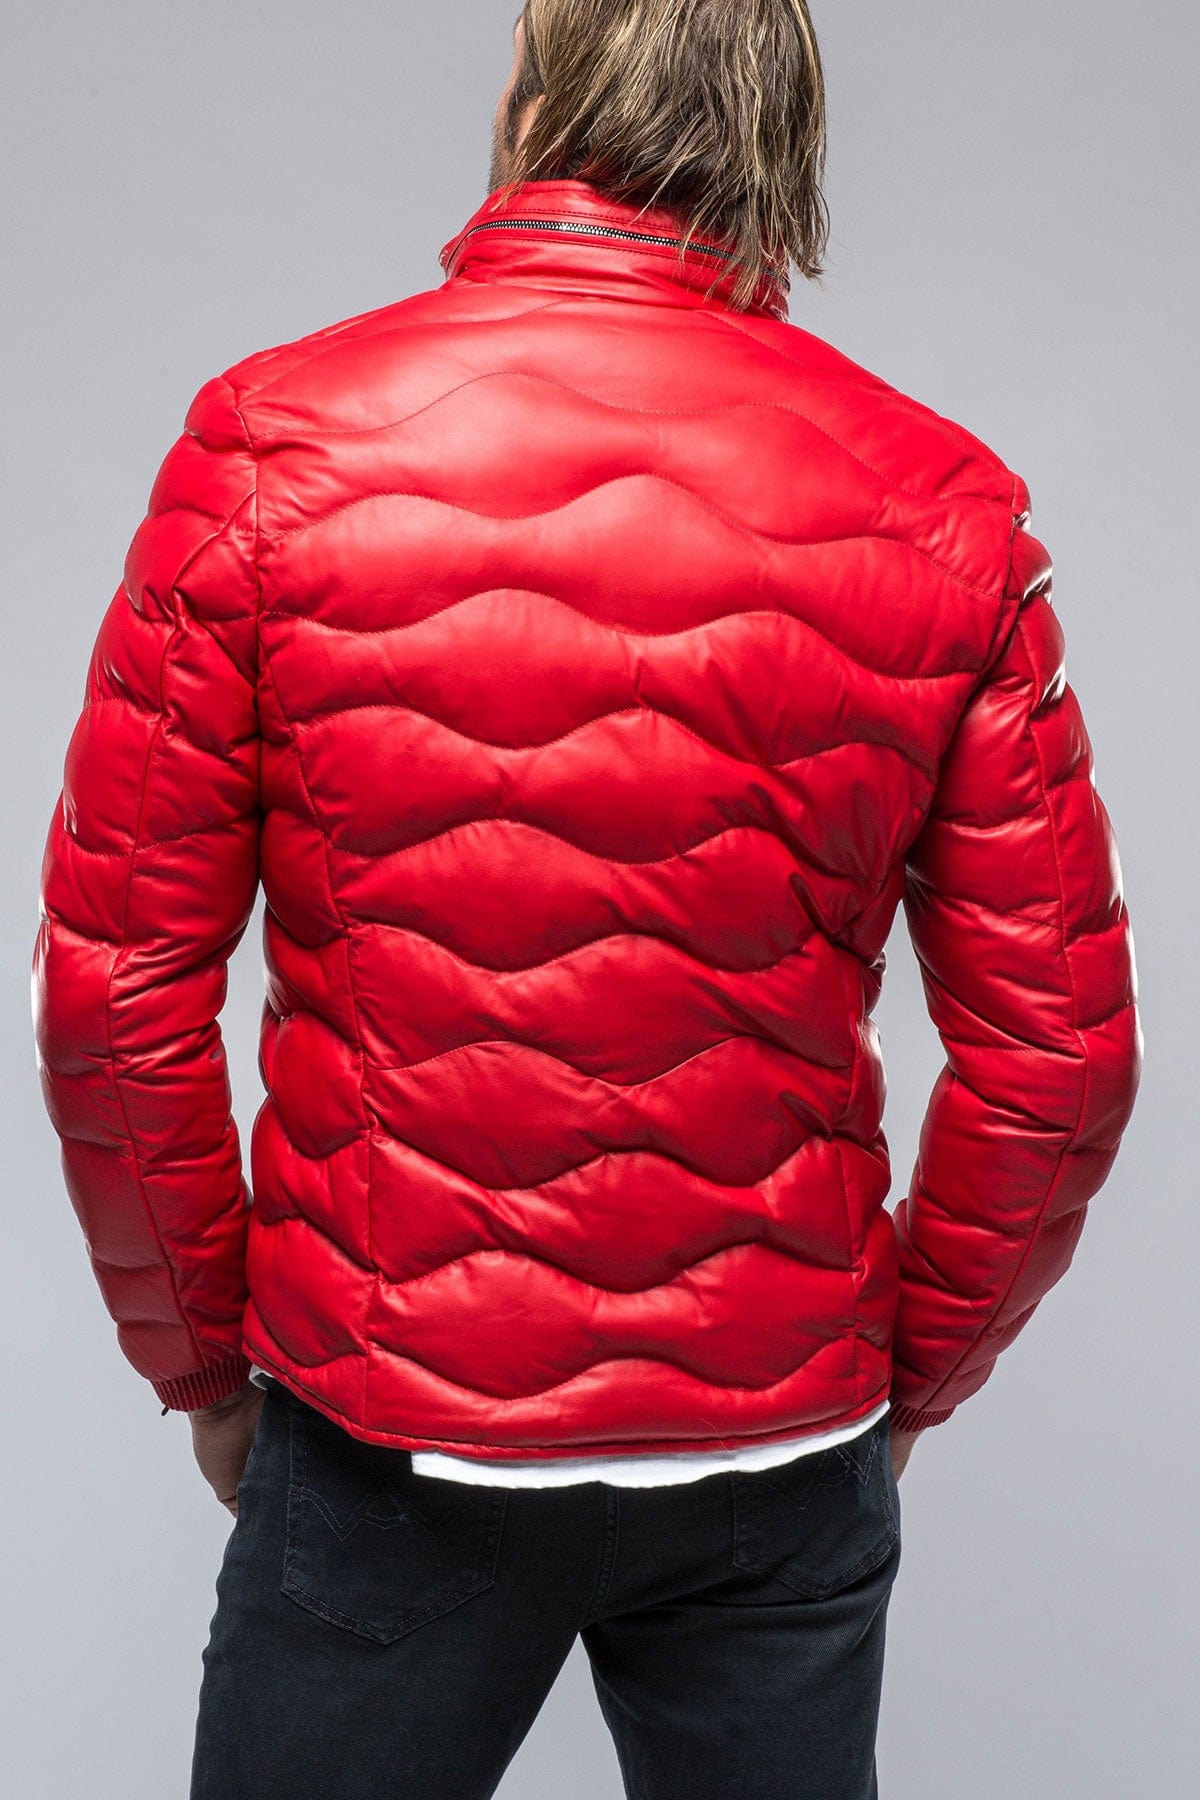 Heinzer Leather Puffer in Red - AXEL'S